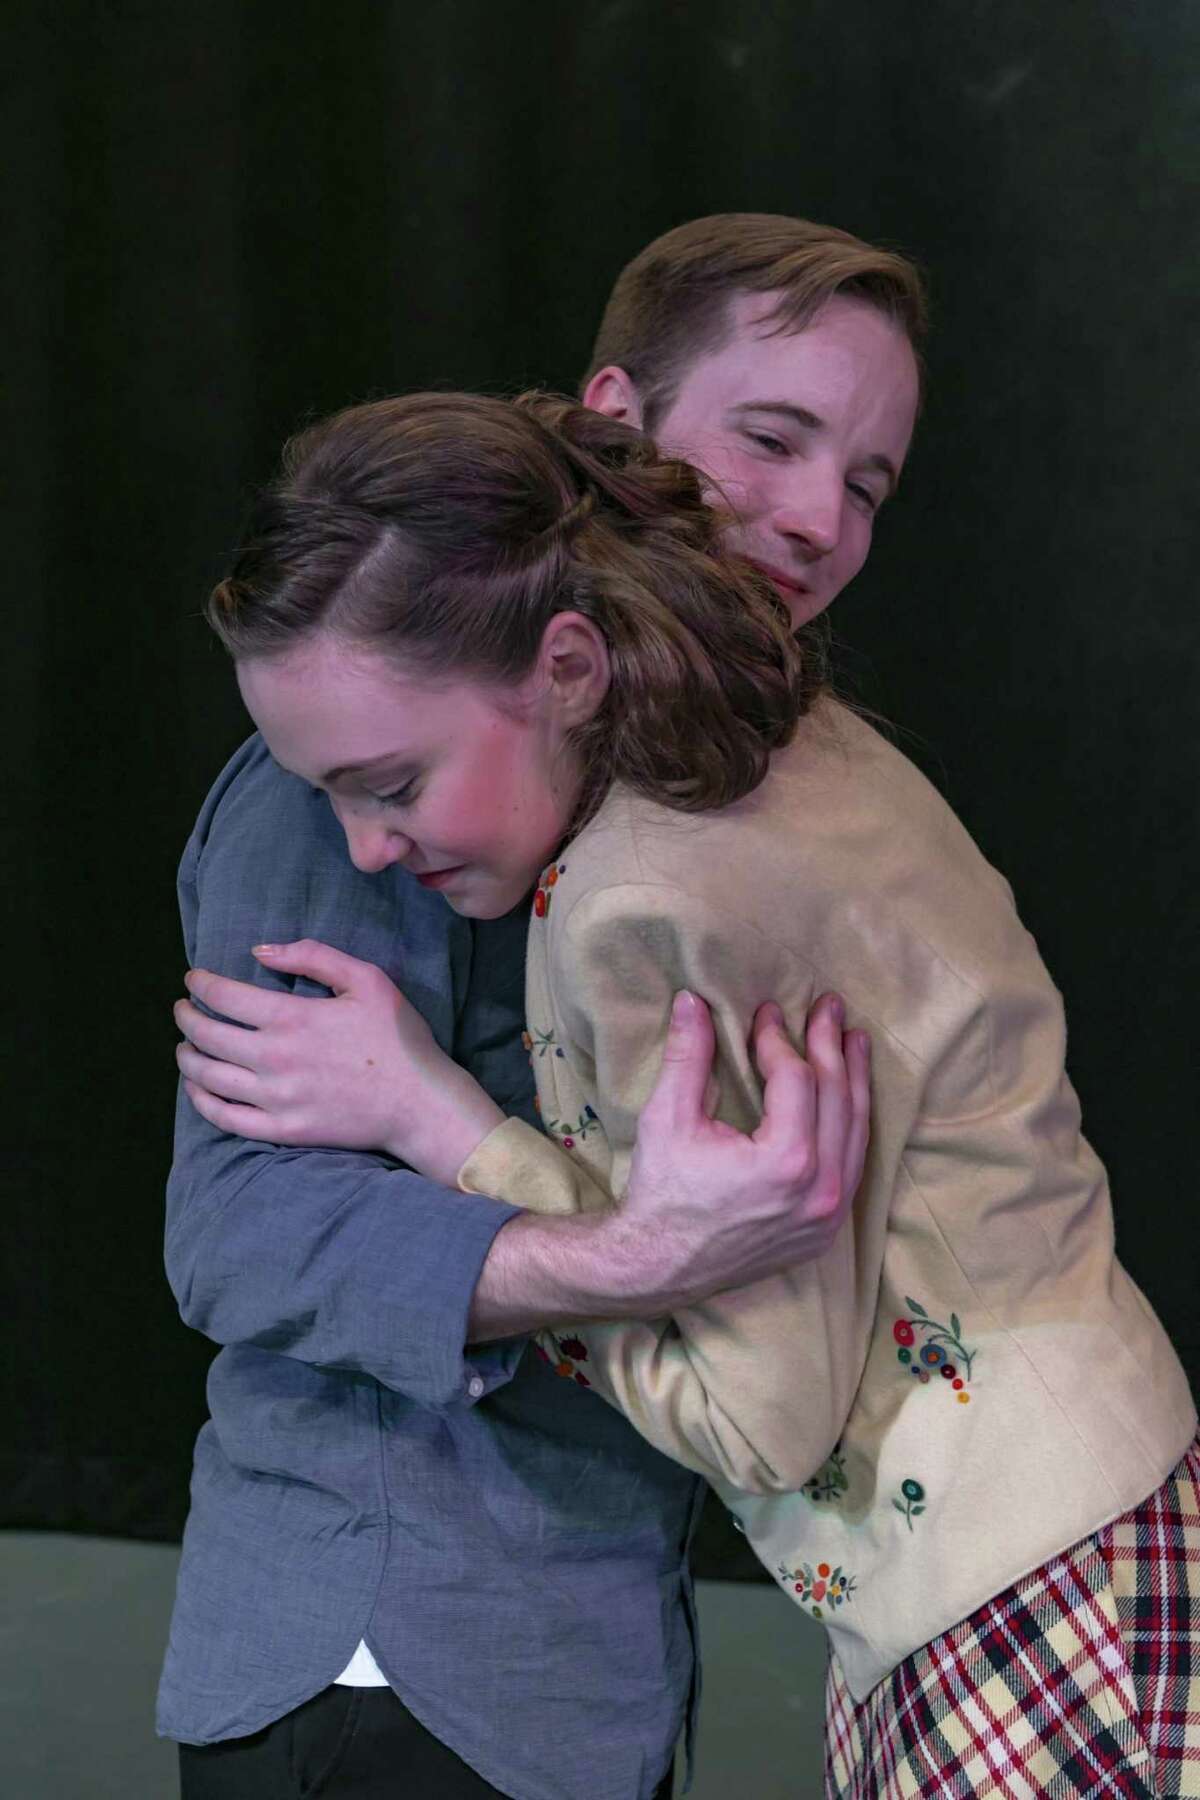 Anne and Peter portrayed by Katie Kowalik and Kevin Downs in Stage Right's "The Diary of Anne Frank" which opens at the Crighton Theatre on April 12 and continues through April 28.